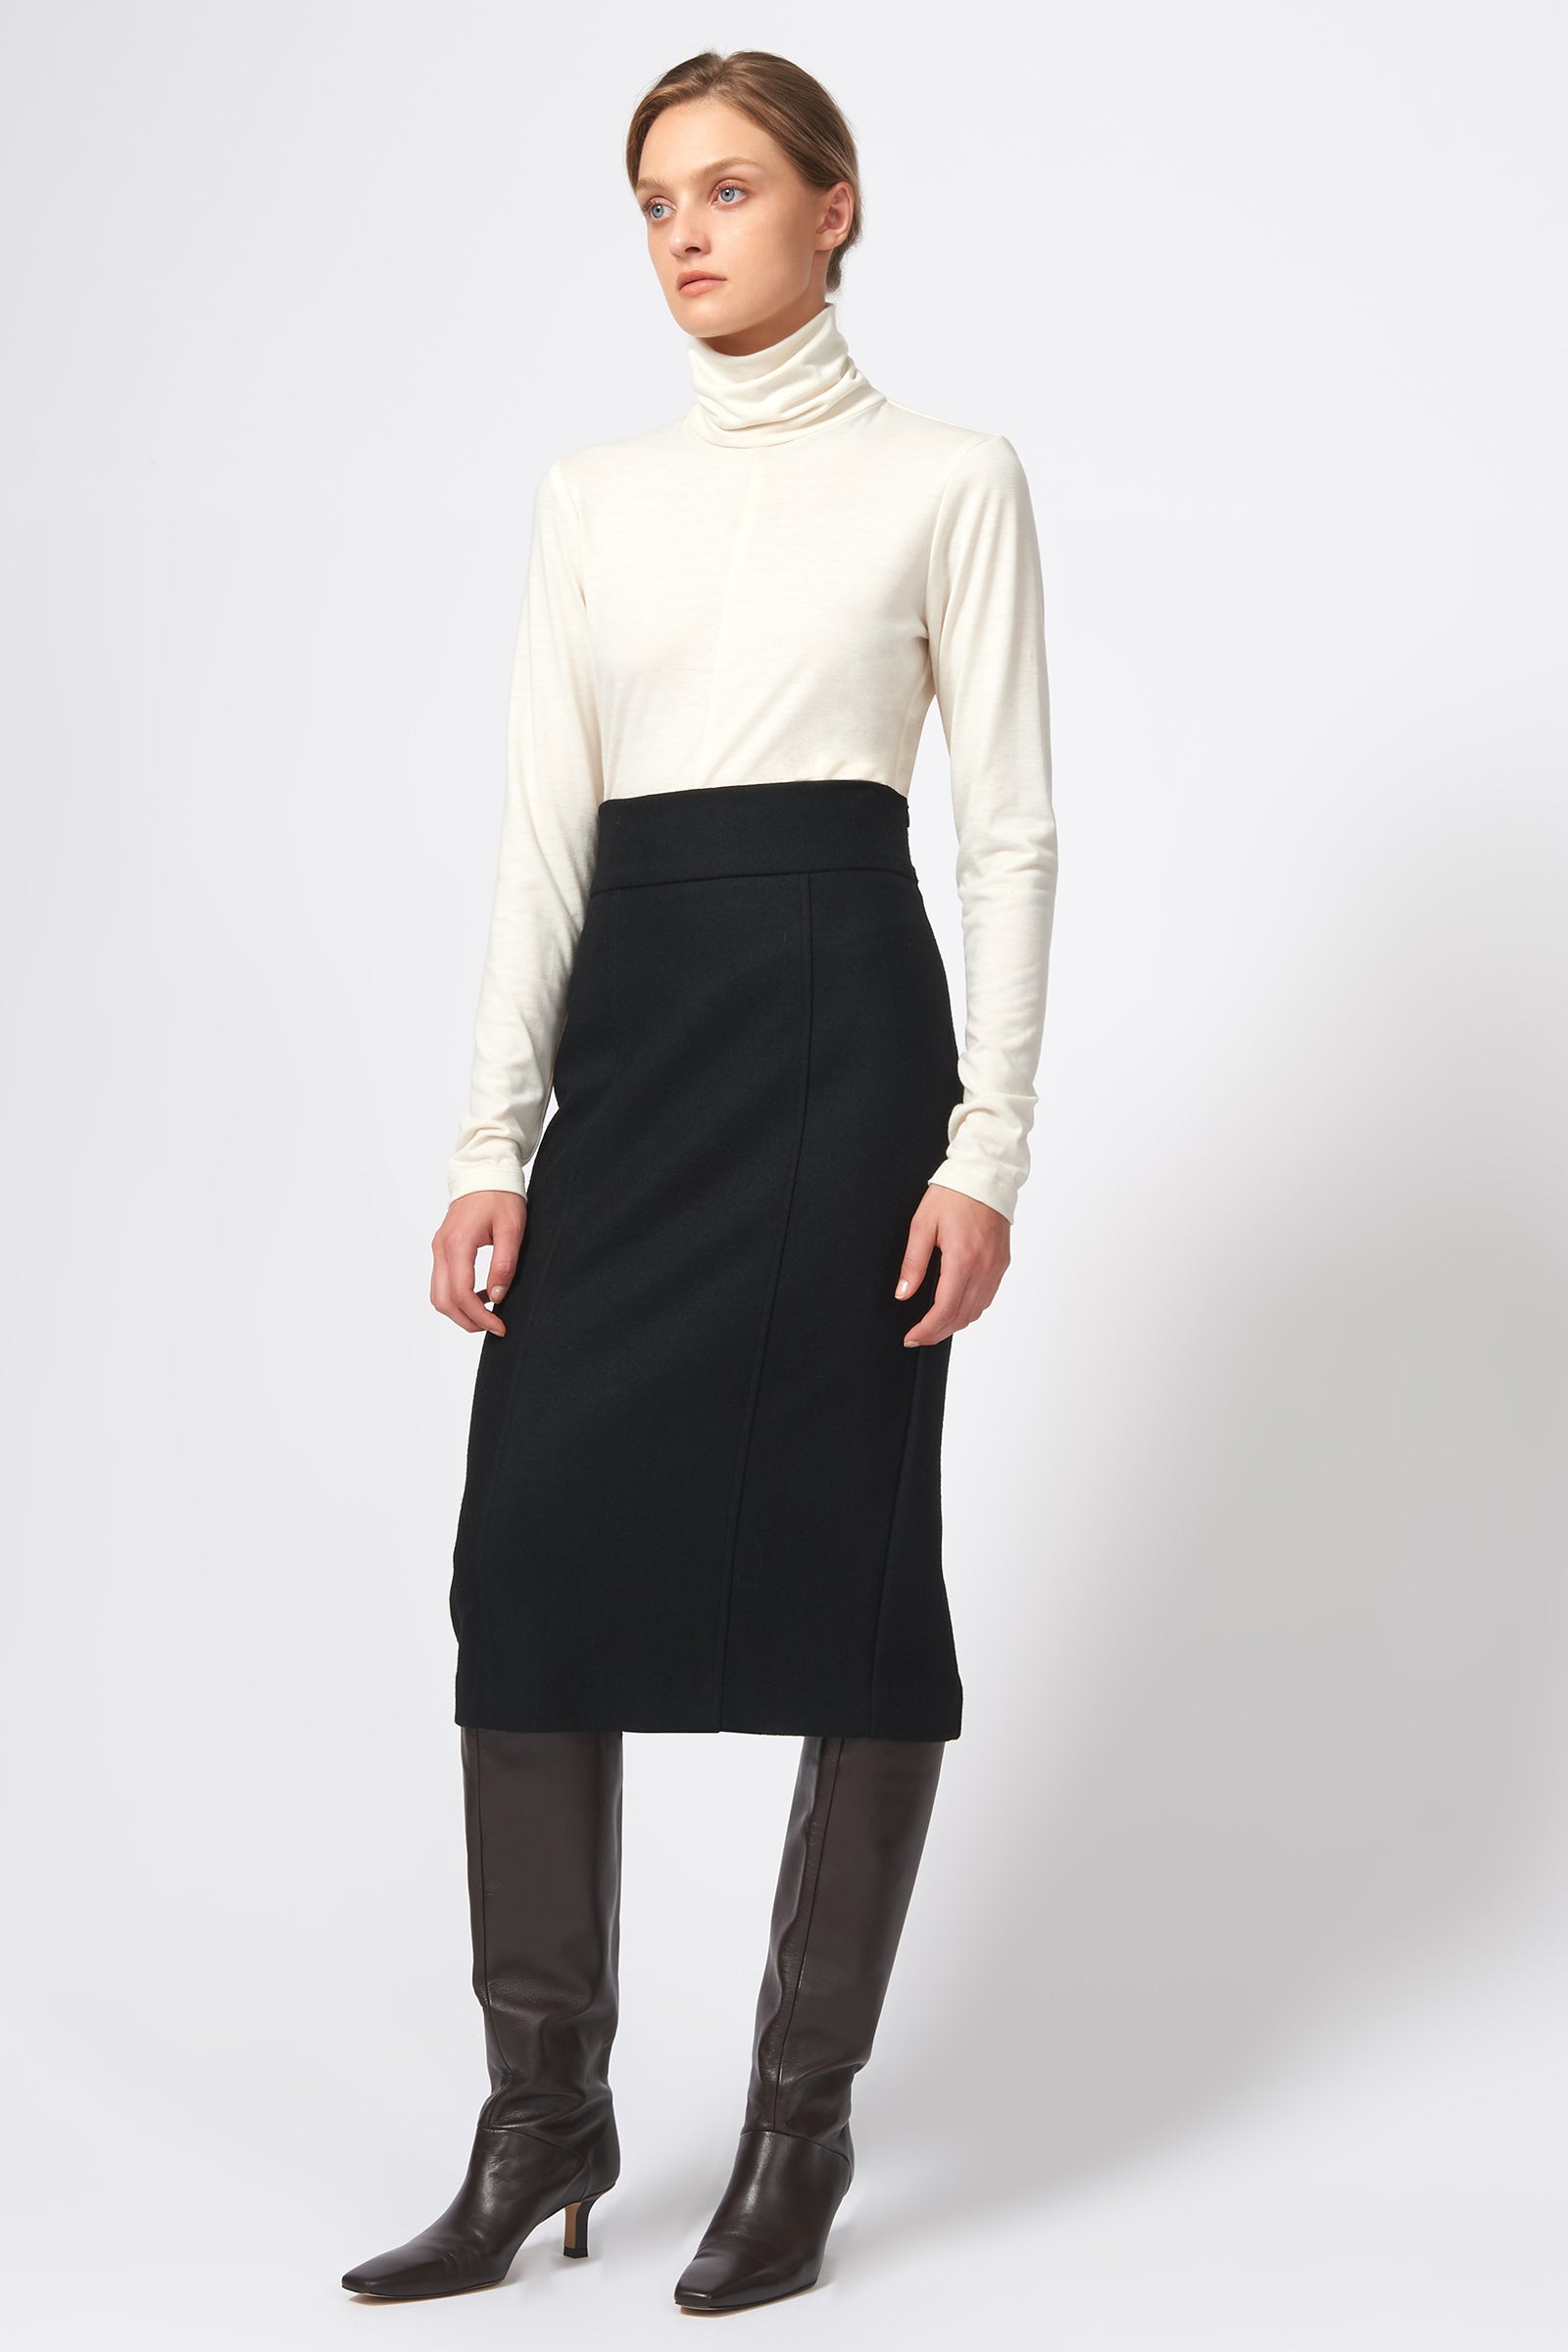 Kal Rieman High Waisted Pencil Skirt in Black on Model Full Front View